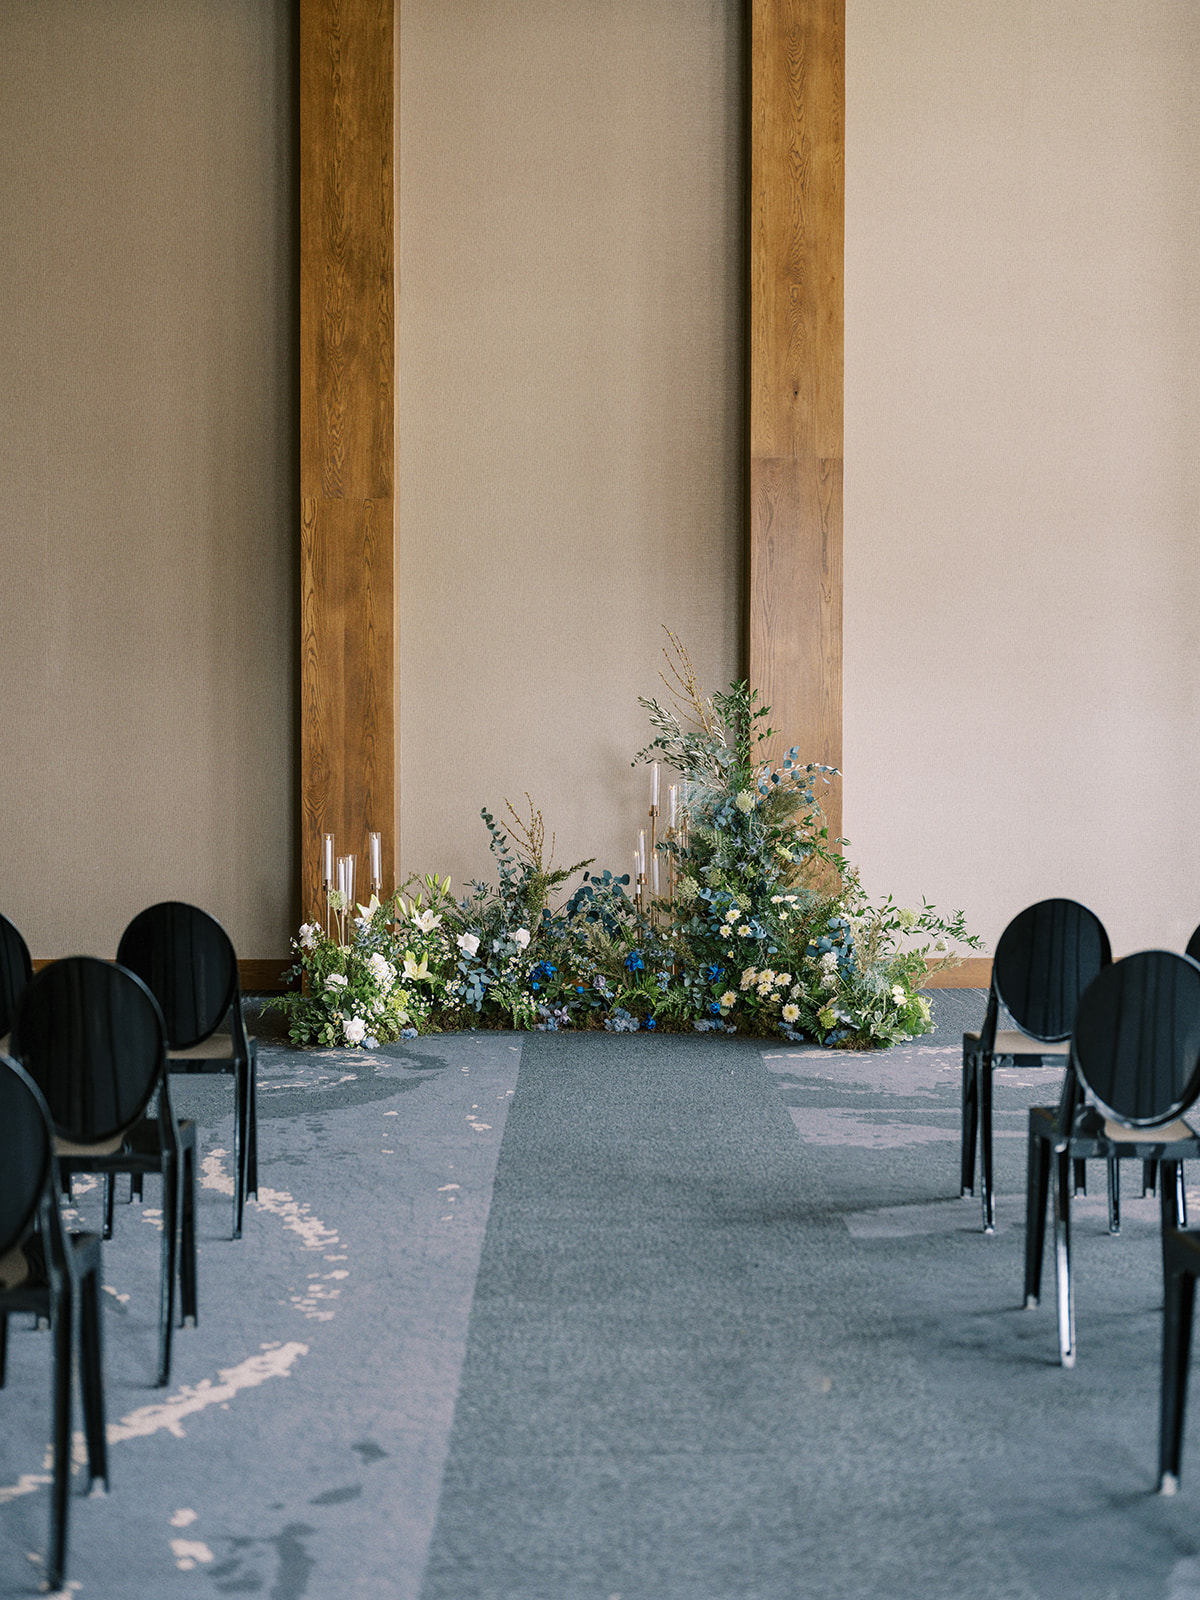 Contemporary and romantic wedding ceremony at The Malcolm Hotel in Canmore, Alberta; grounded floral arch for an indoor wedding ceremony with black ghost chairs